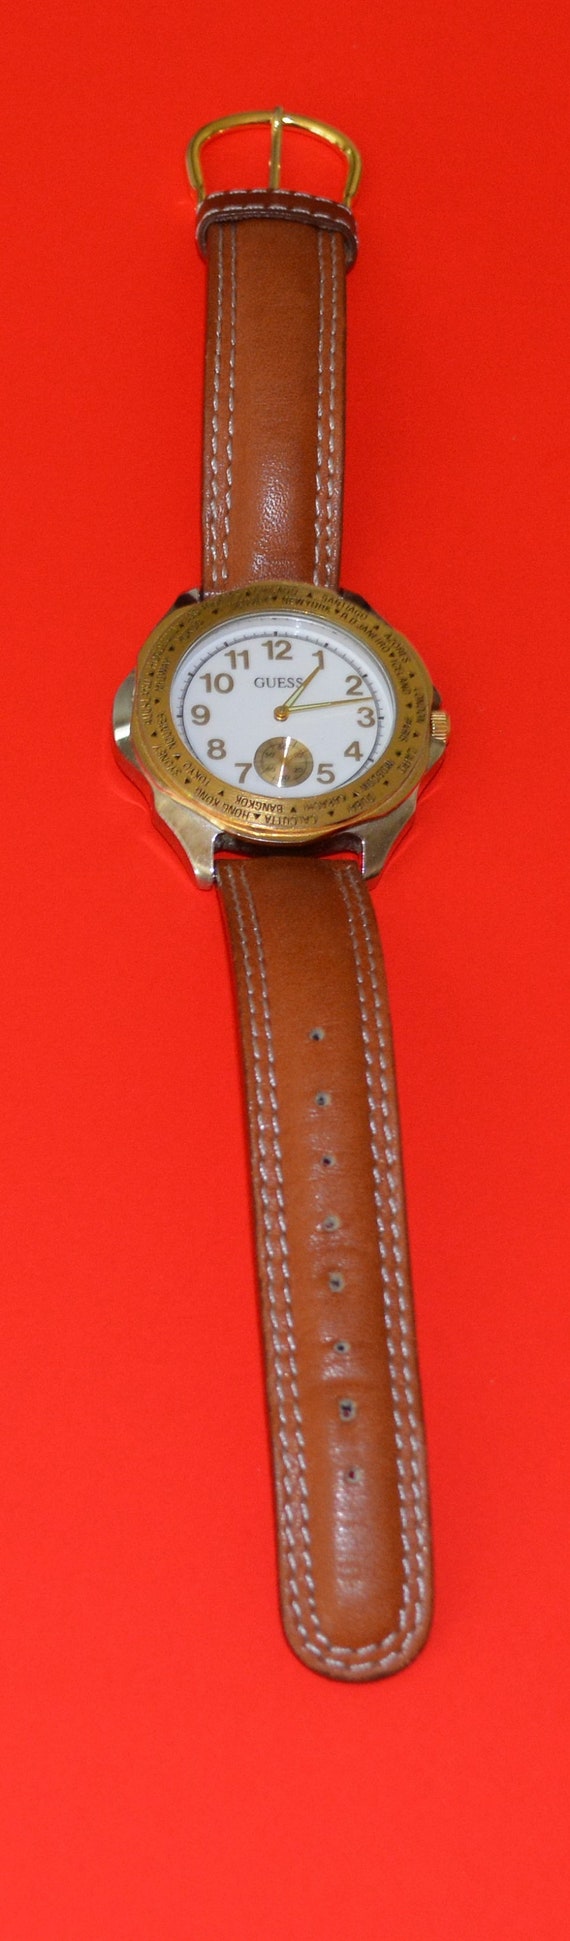 Watch-Guess Men's Watch 1992 Leather Strap Water … - image 8